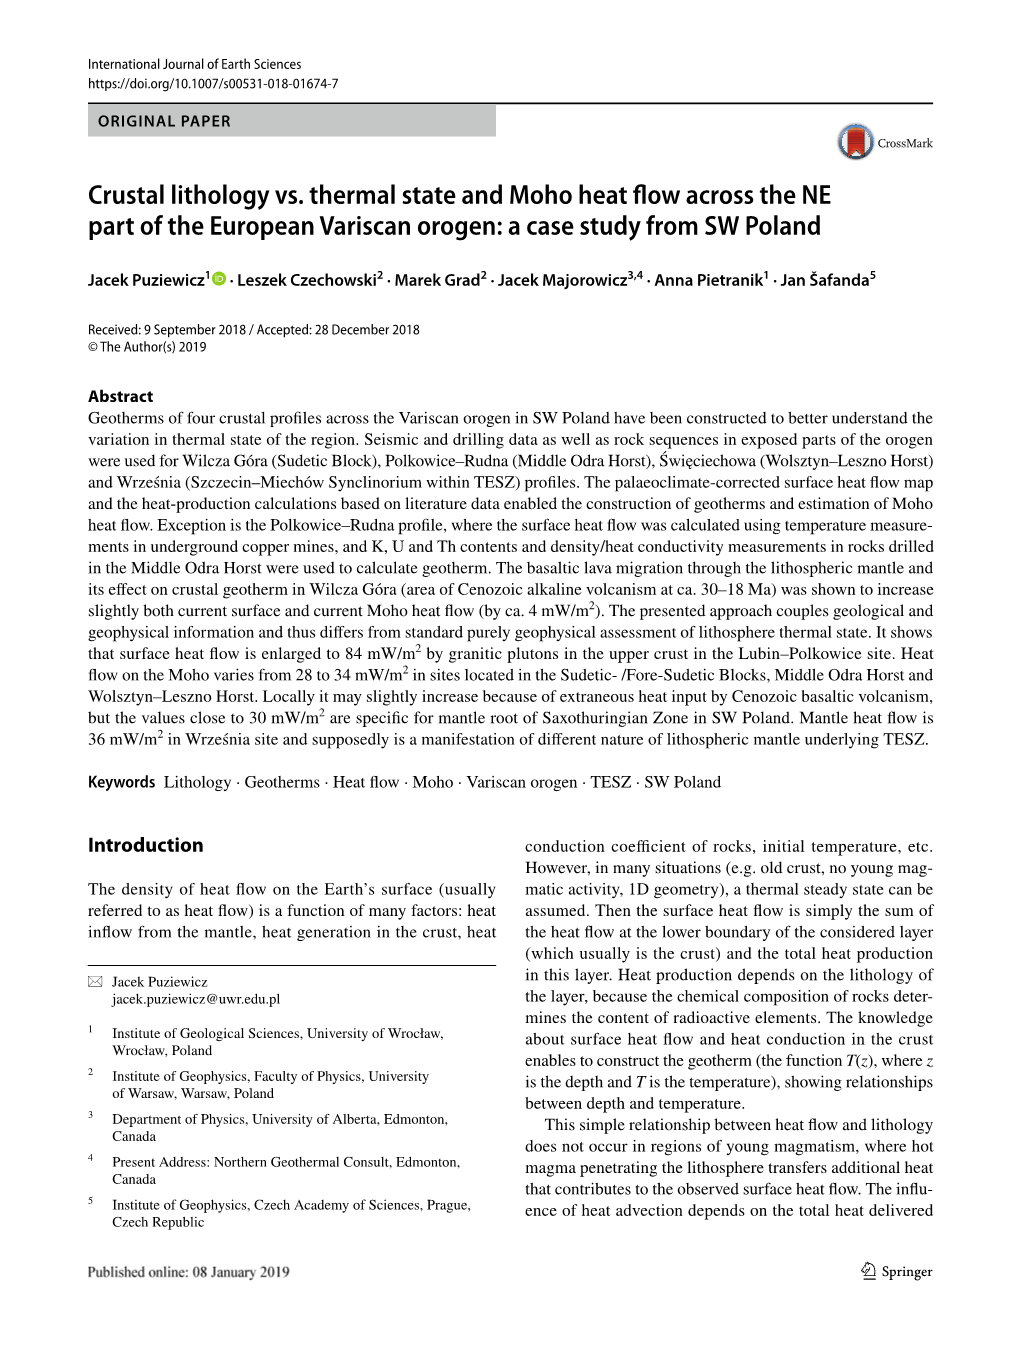 Crustal Lithology Vs. Thermal State and Moho Heat Flow Across the NE Part of the European Variscan Orogen: a Case Study from SW Poland